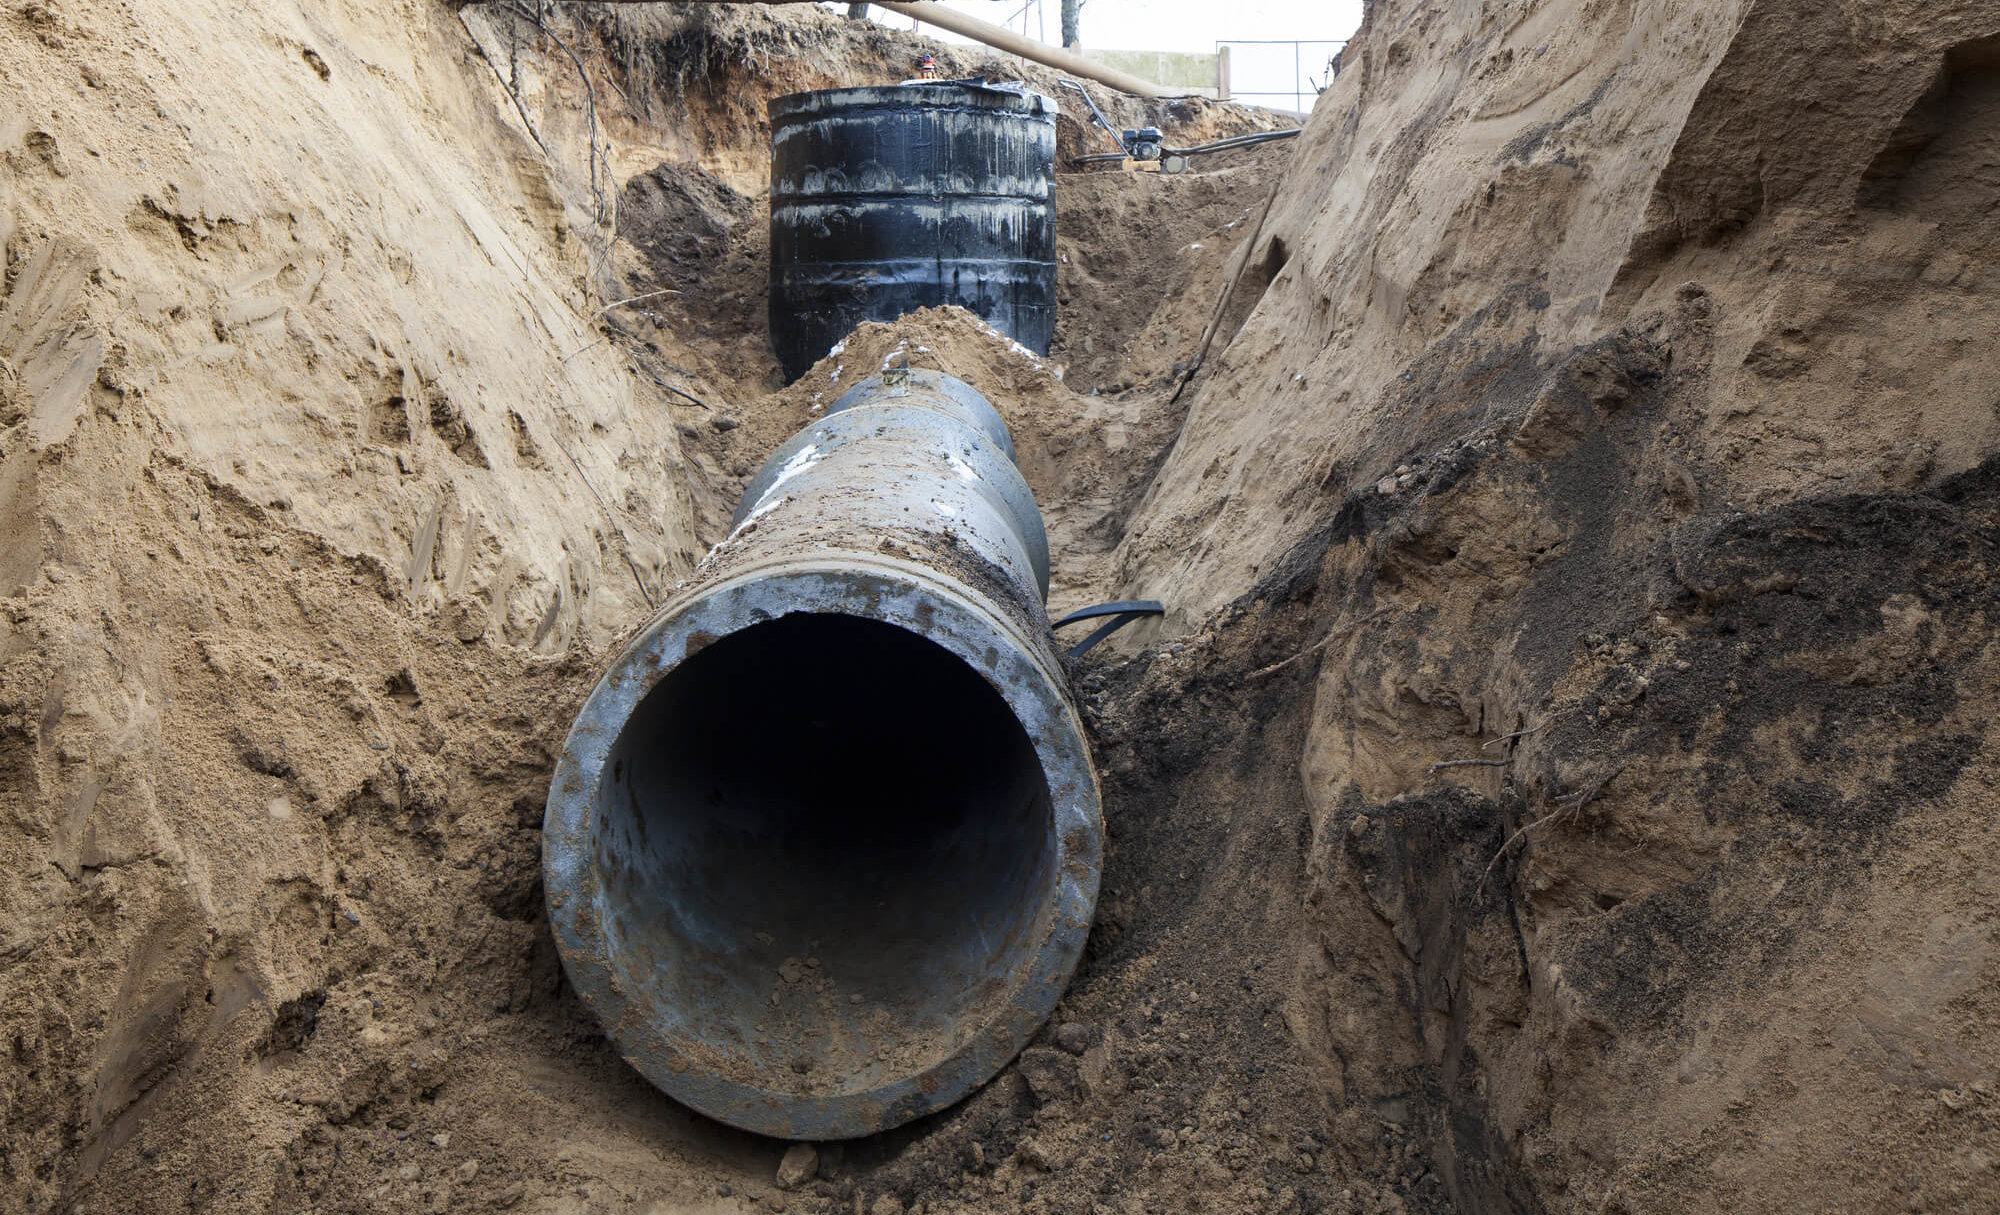 Full procedure of installing a residential sewer line. Understand sewer line installing in simple terms